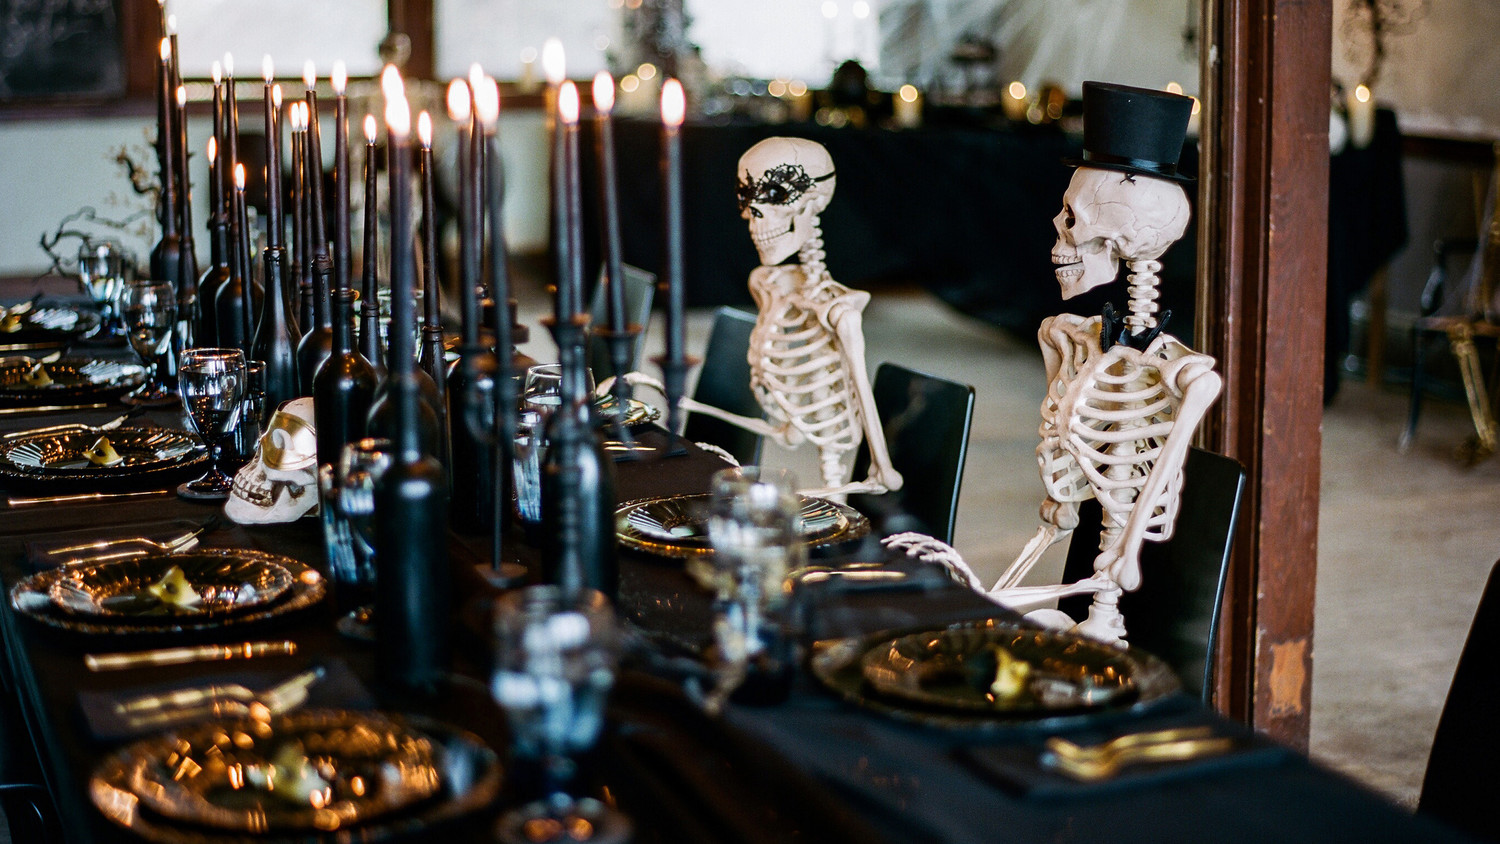 eli skeleton masquerade birthday party decor table with candles place settings